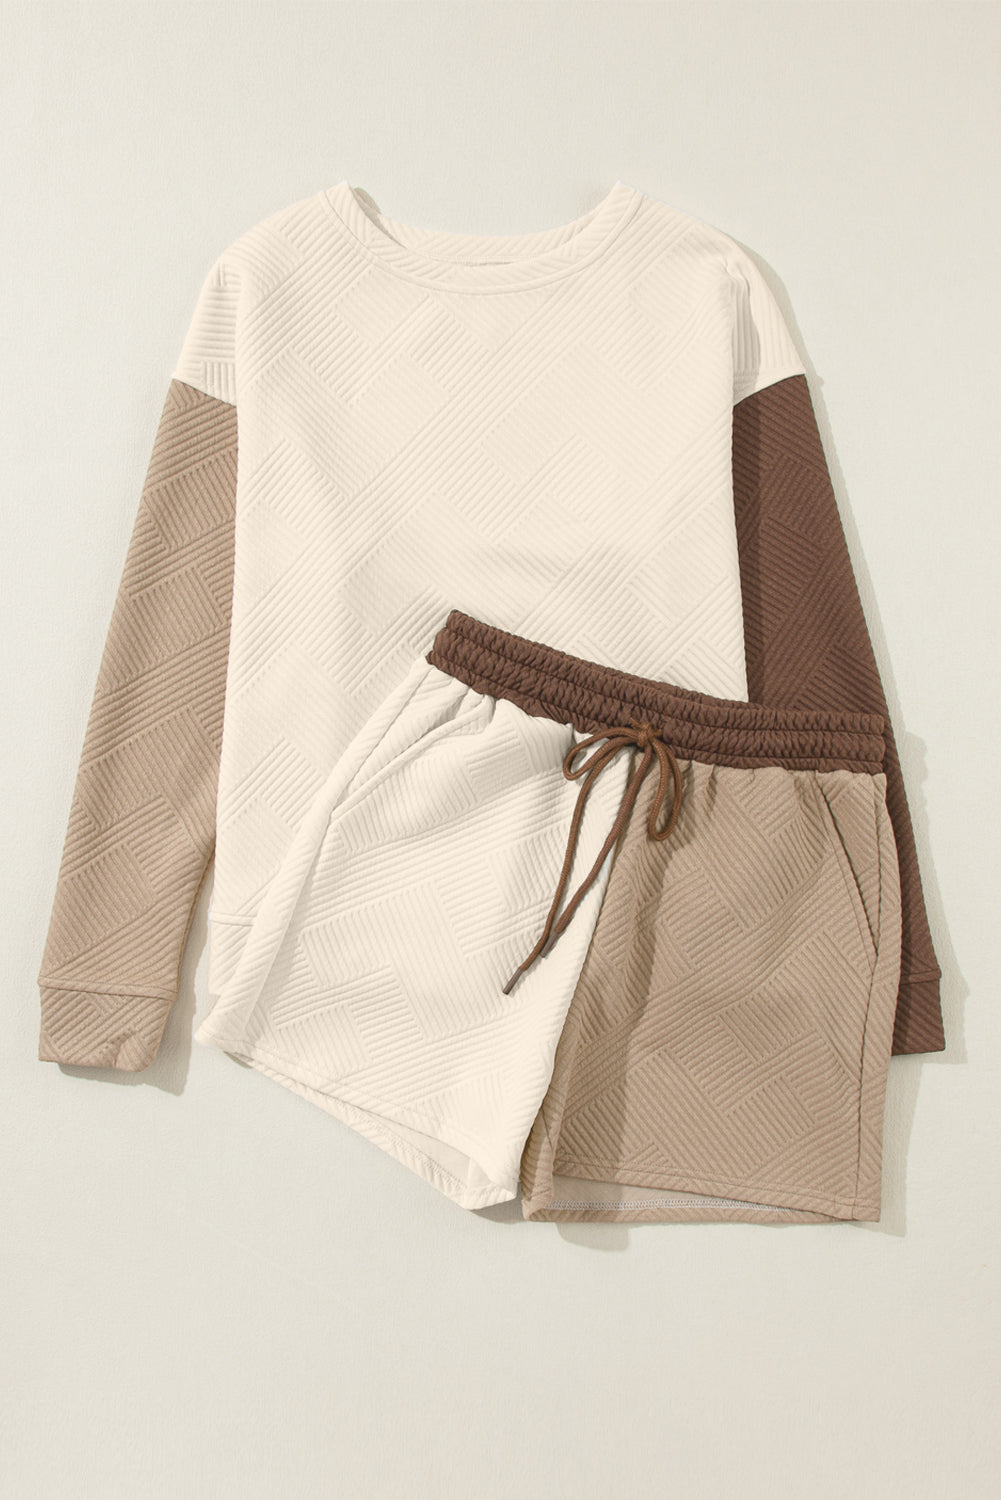 Multicolour Contrast Sleeve Color Block Pullover Shorts Textured Outfit